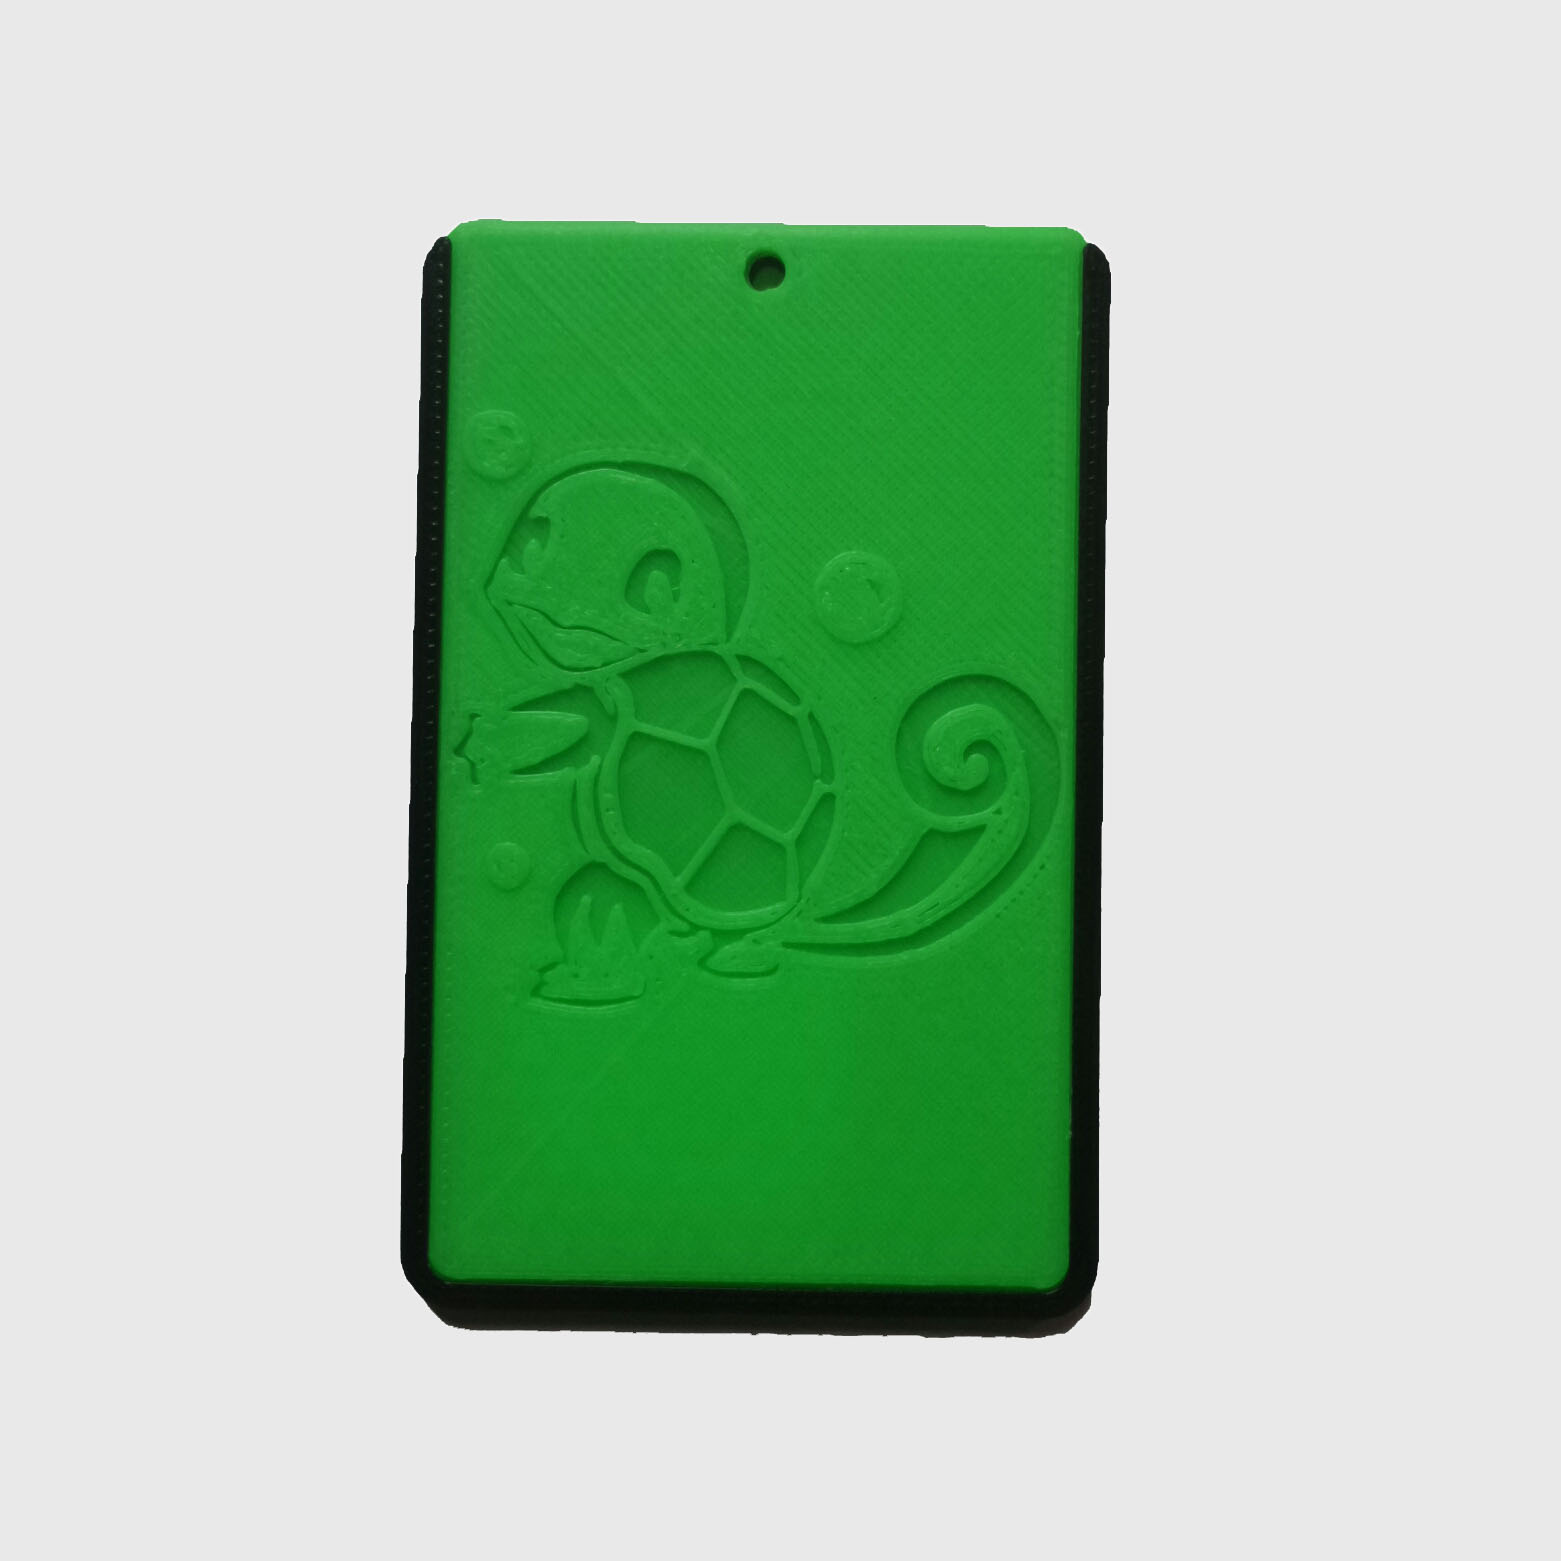 POKEMON - SQUIRTLE - ID card holder Credit Card Bus card case keyring